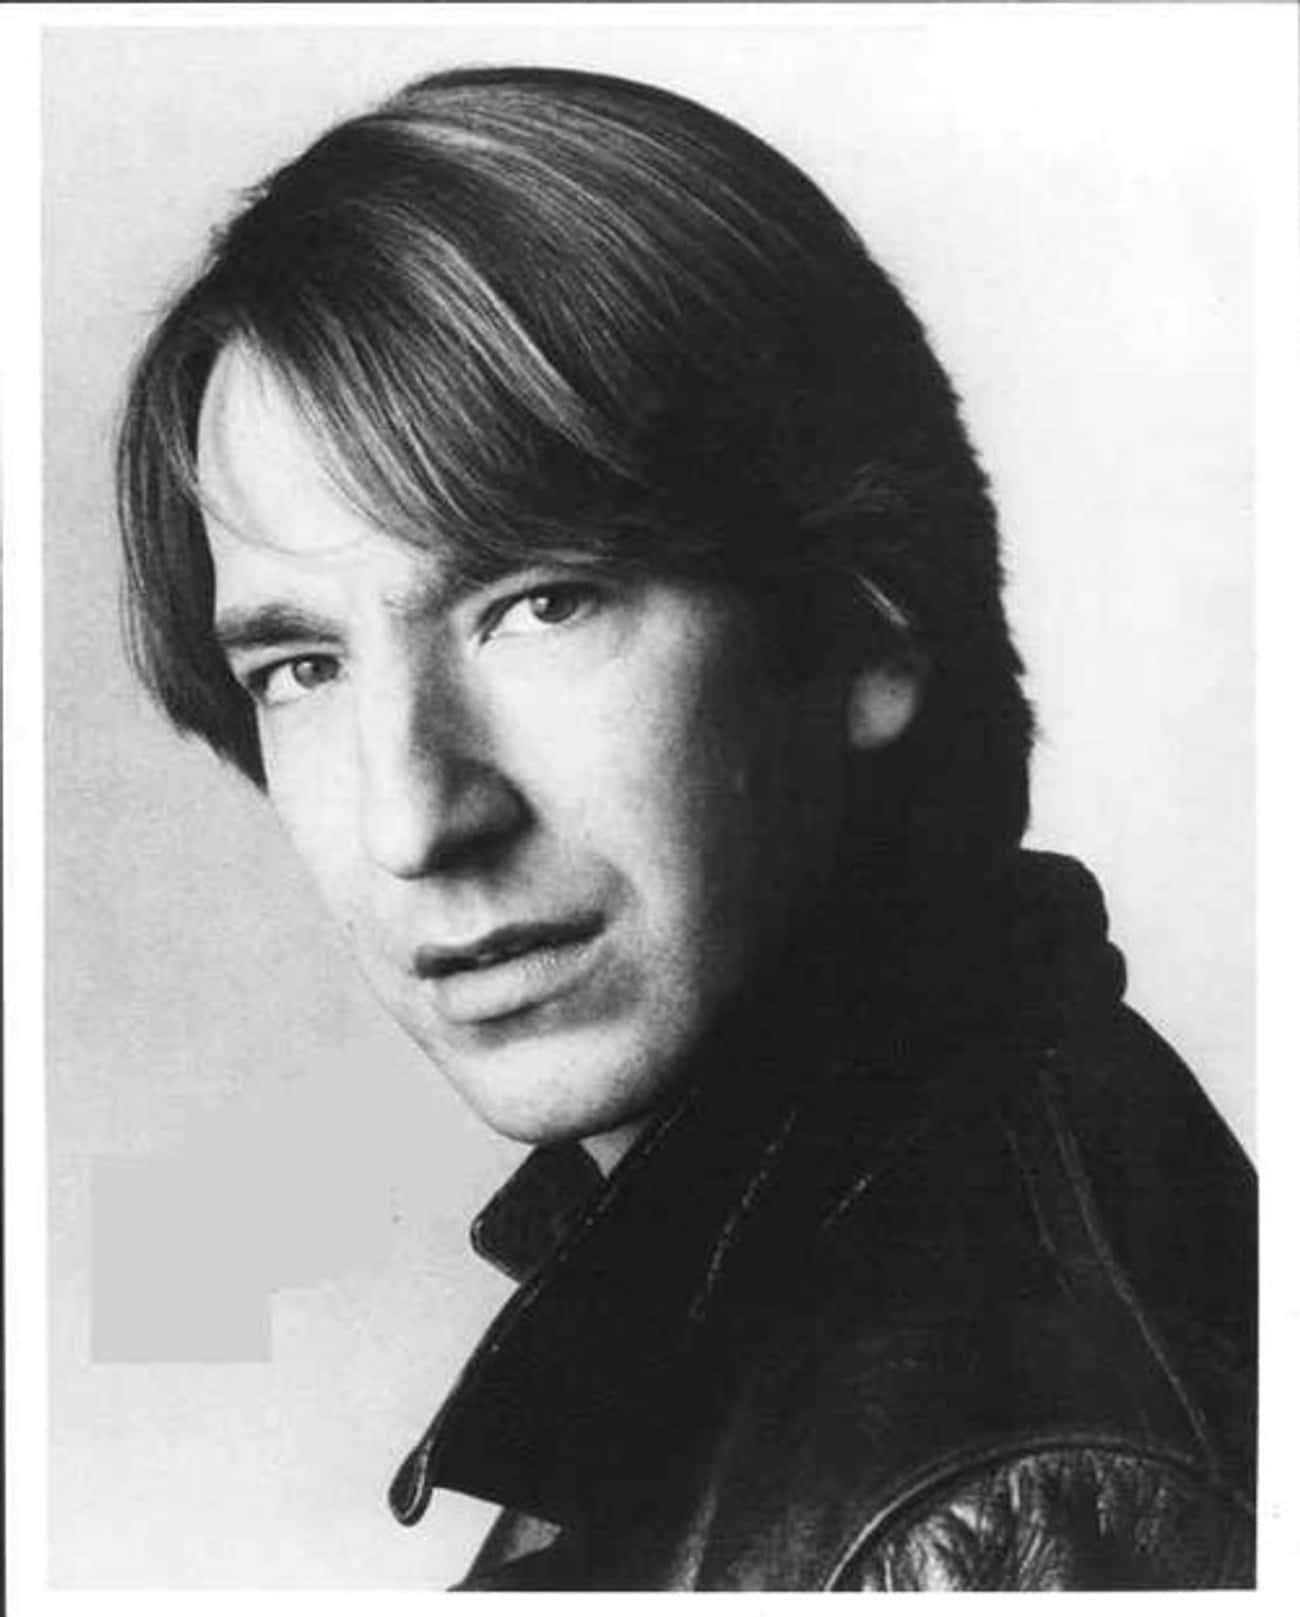 Young Alan Rickman in Black Leather Jacket